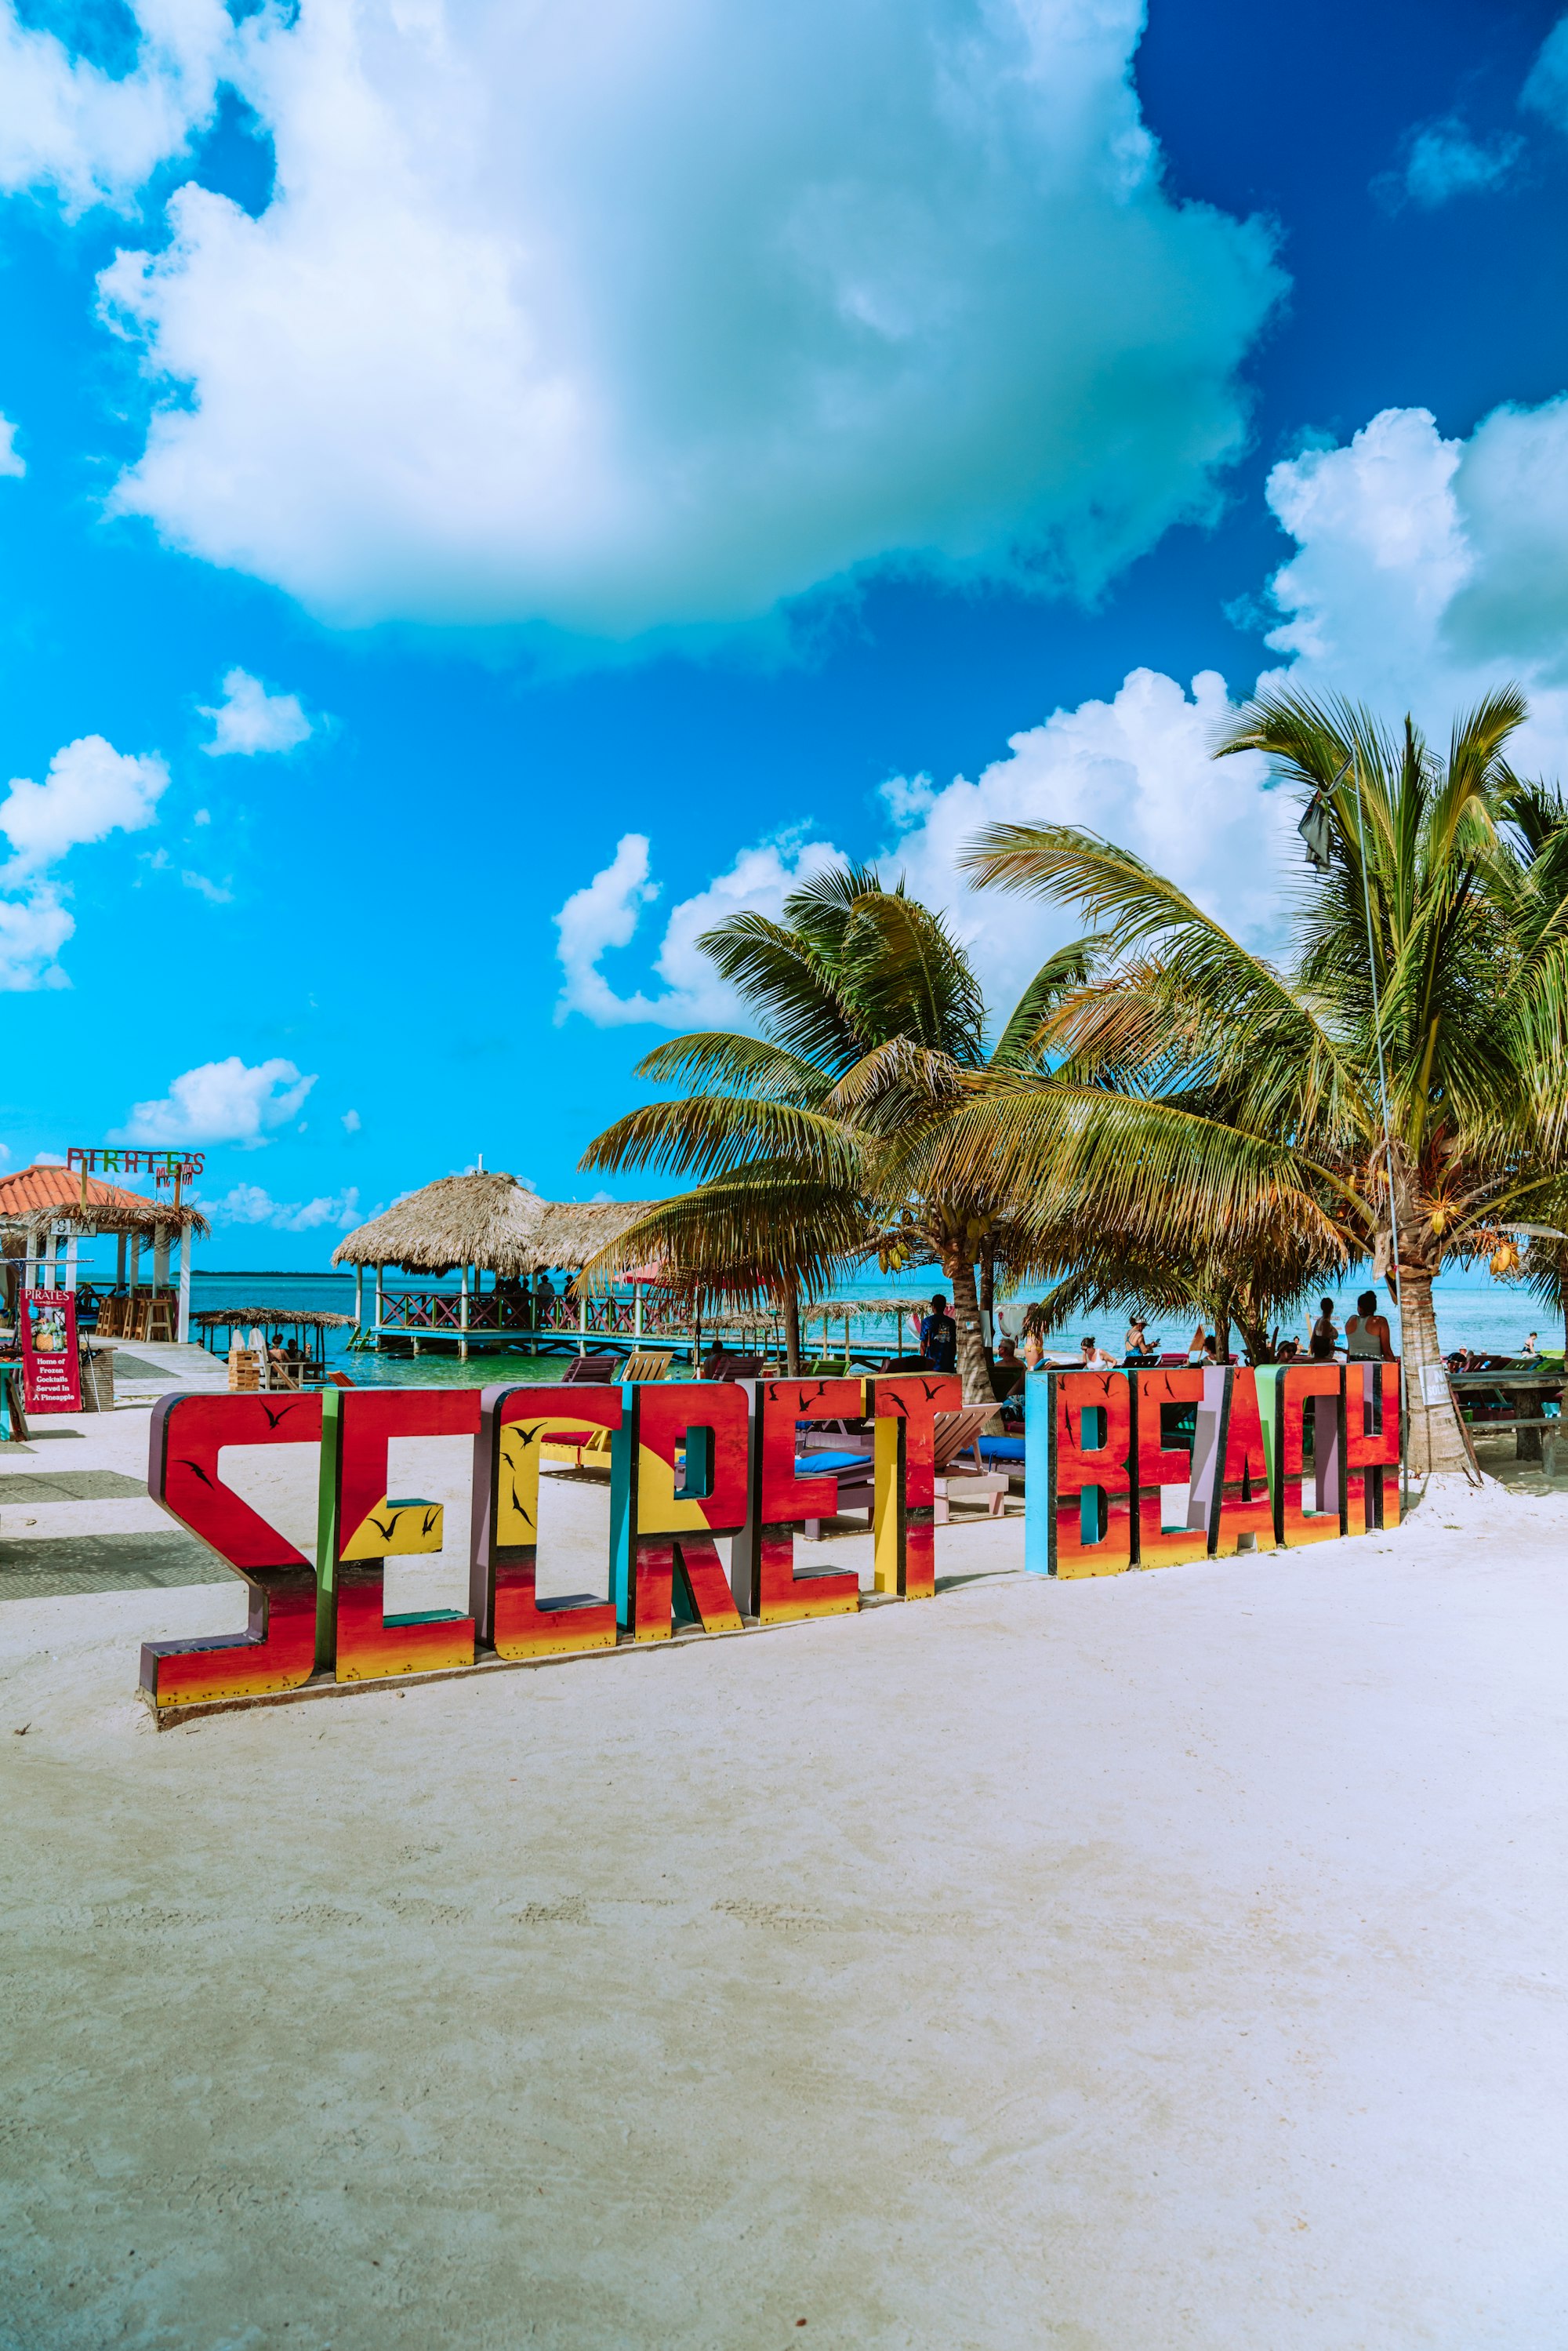 Giant painted letters sign at the entrance of Secret Beach.